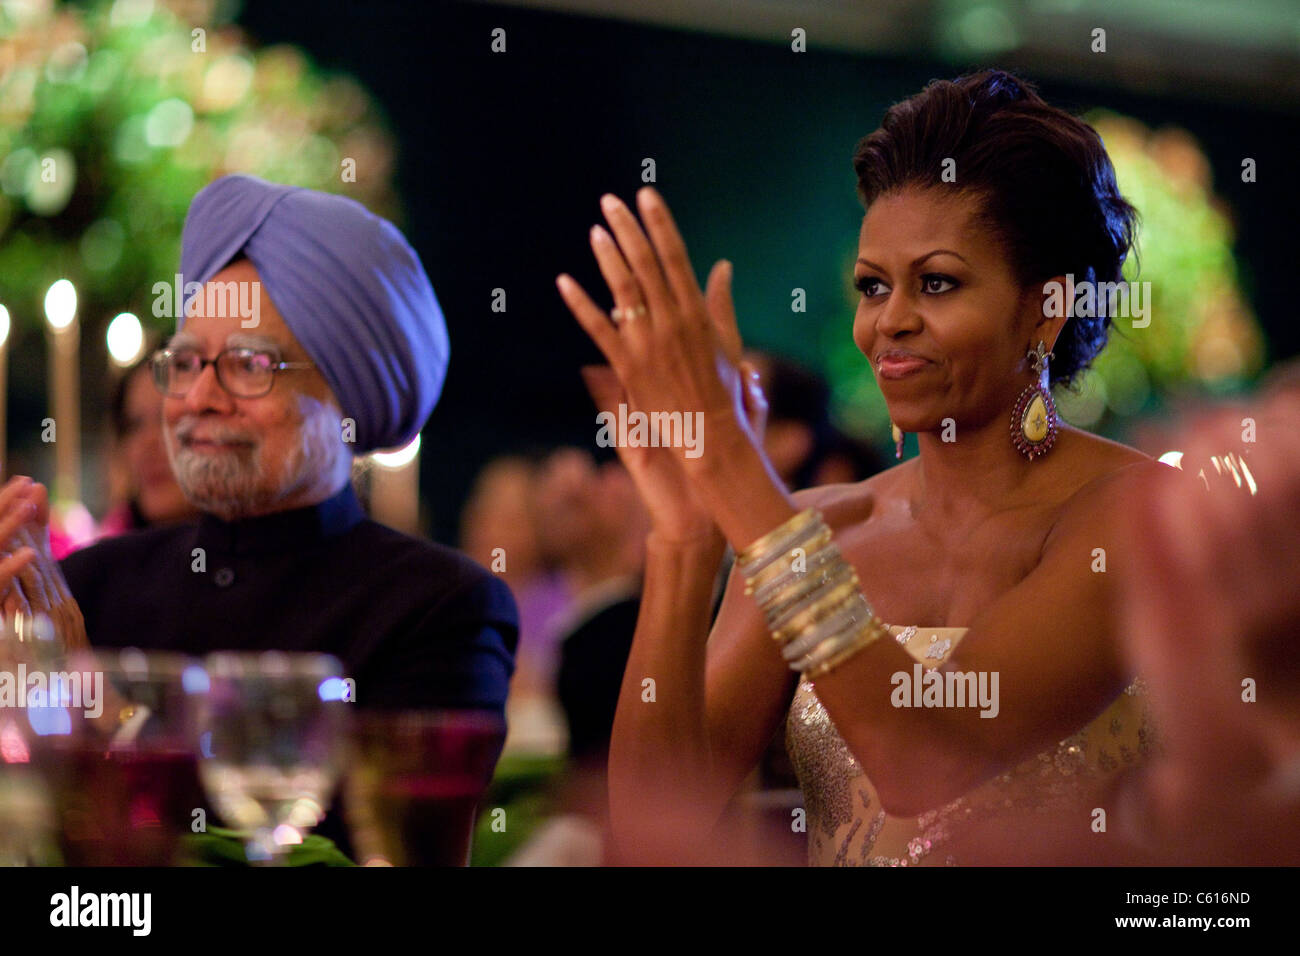 Michelle Obama applauds during the State Dinner for Prime Minister Manmohan Singh of India and his wife Mrs. Gursharan Kaur. Michelle's wears Bochic earrings of rose cut diamonds amber and tourmaline stones and bangle bracelets., Photo by: Everett Collection(BSLOC 2011 7 90) Stock Photo